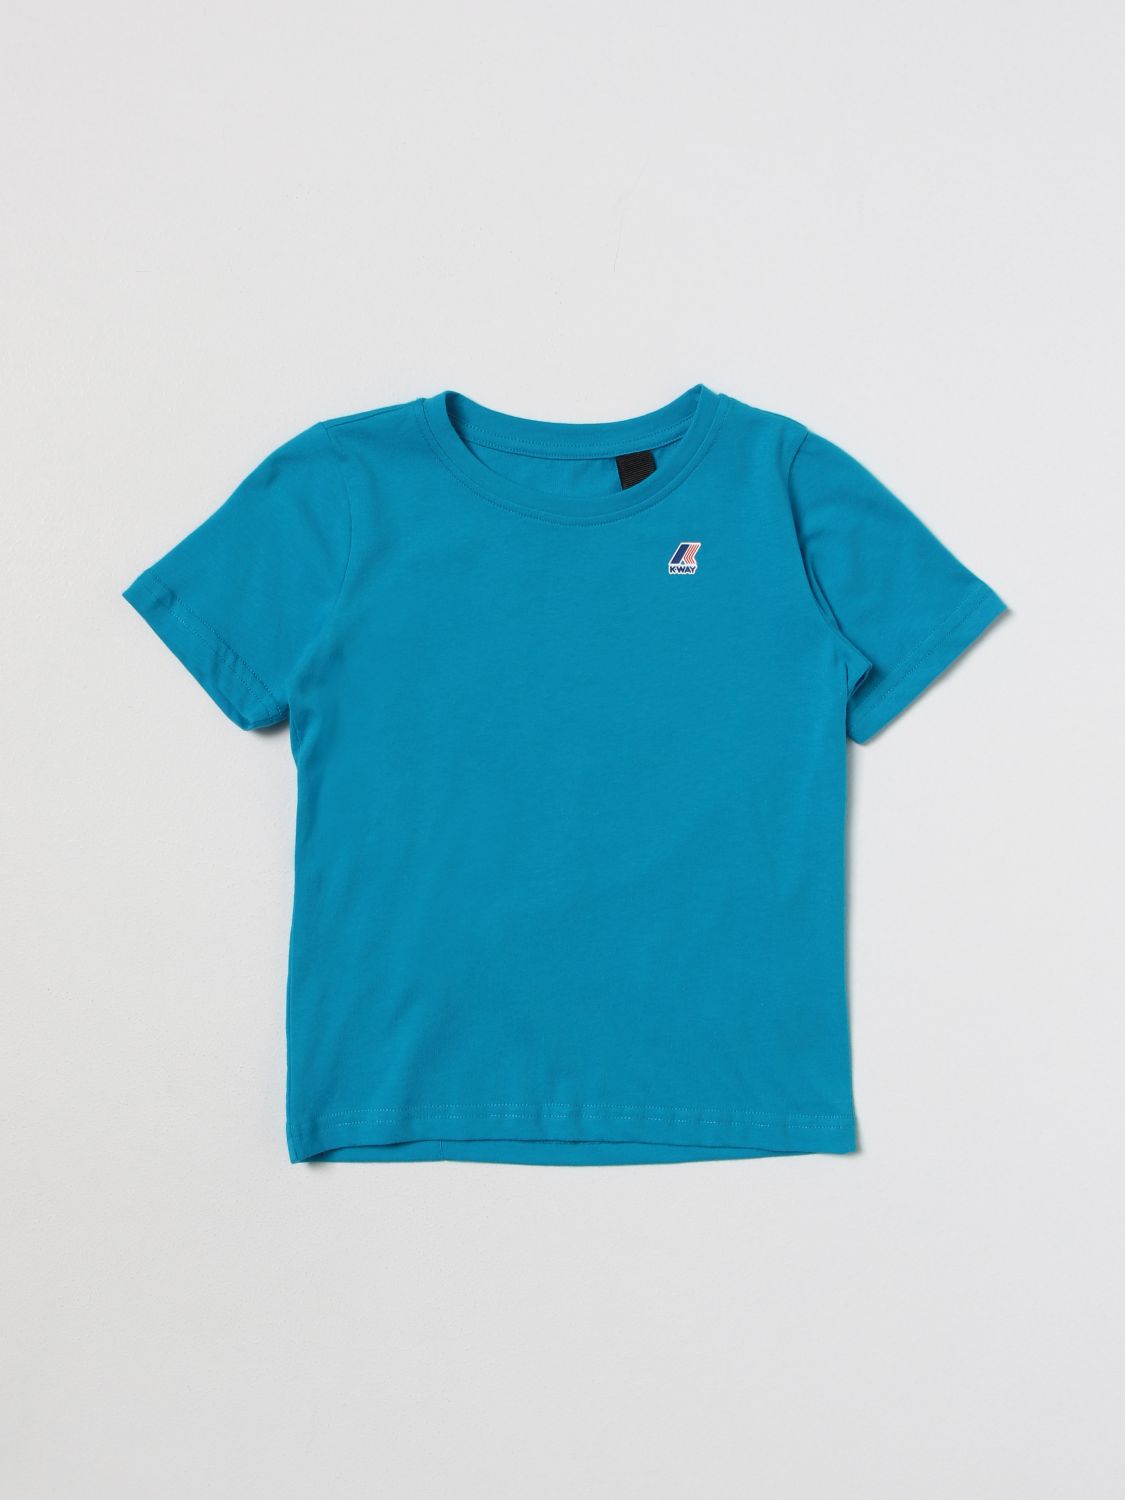 K-way T-shirt  Kids Color Turquoise